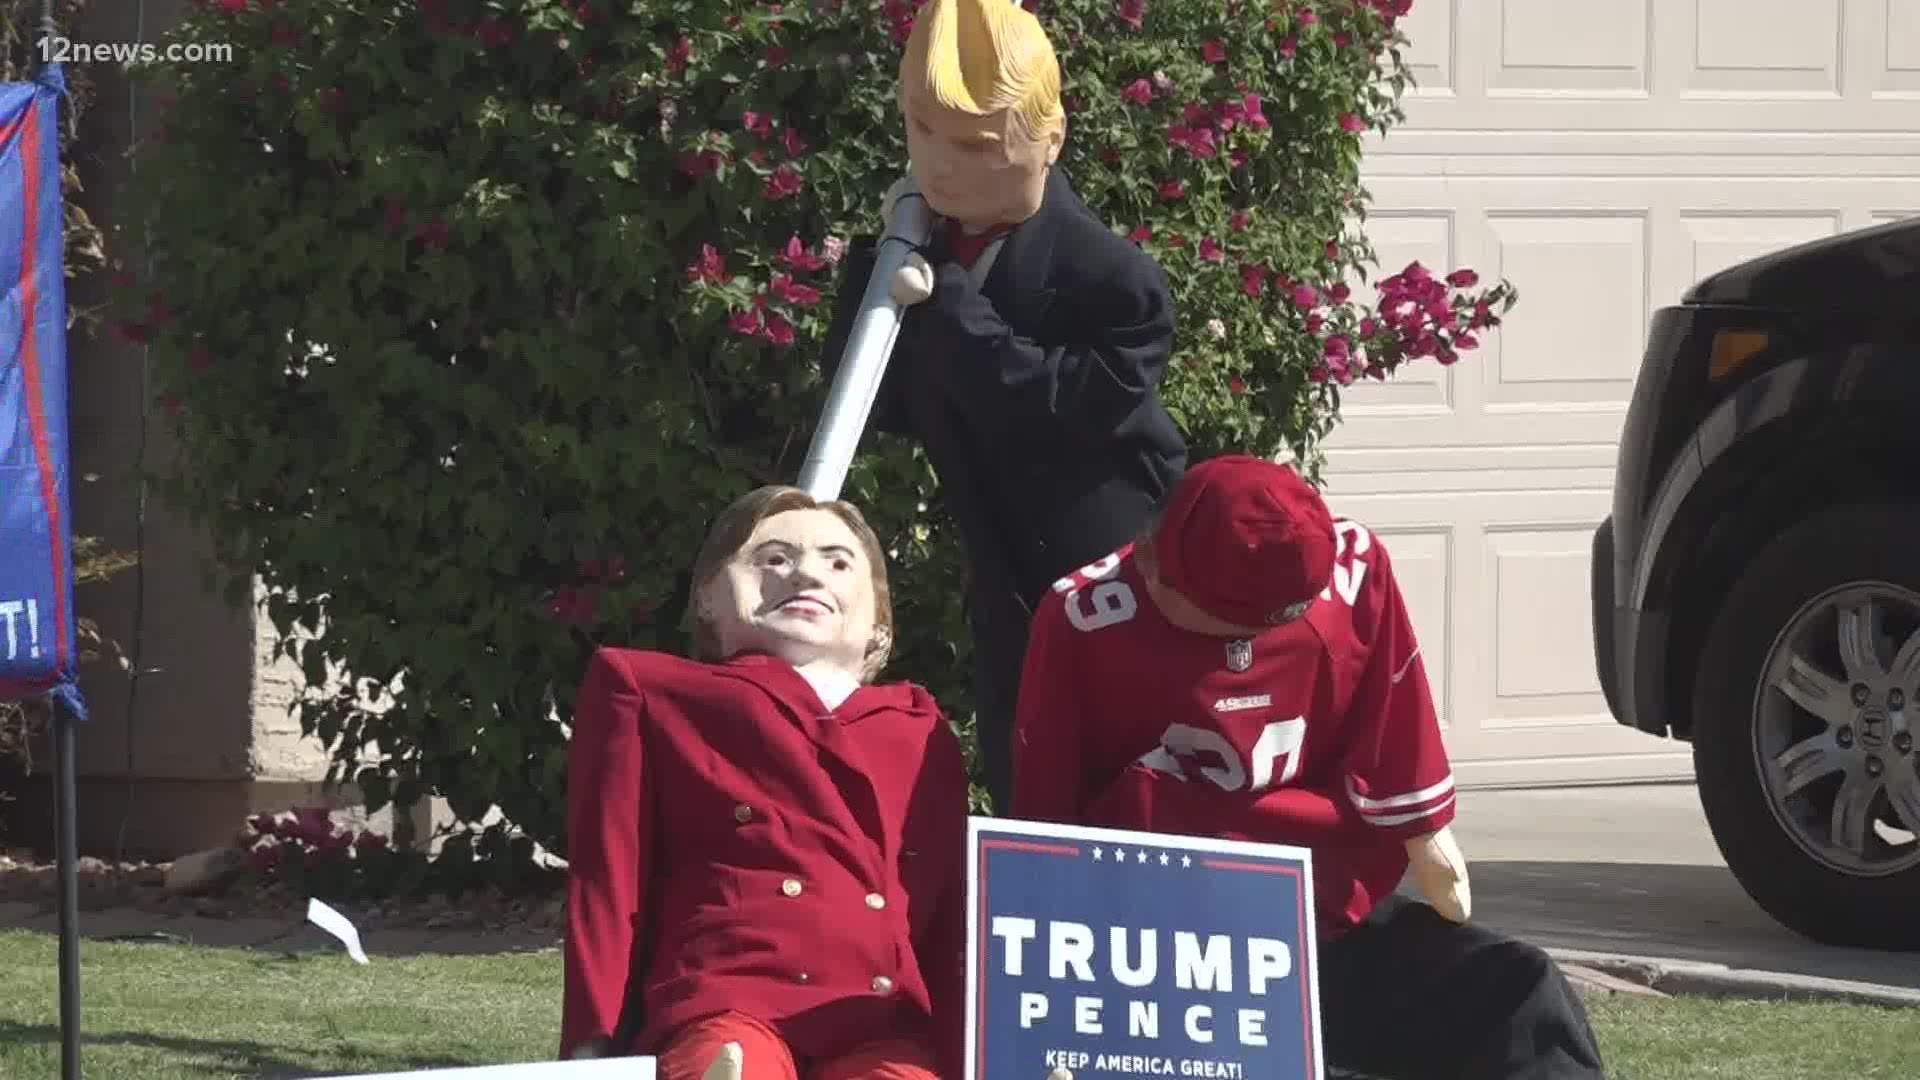 The hotly contested election has been a divisive topic among neighbors. And an election-themed Halloween display in the northwest Valley is causing a downright rift.